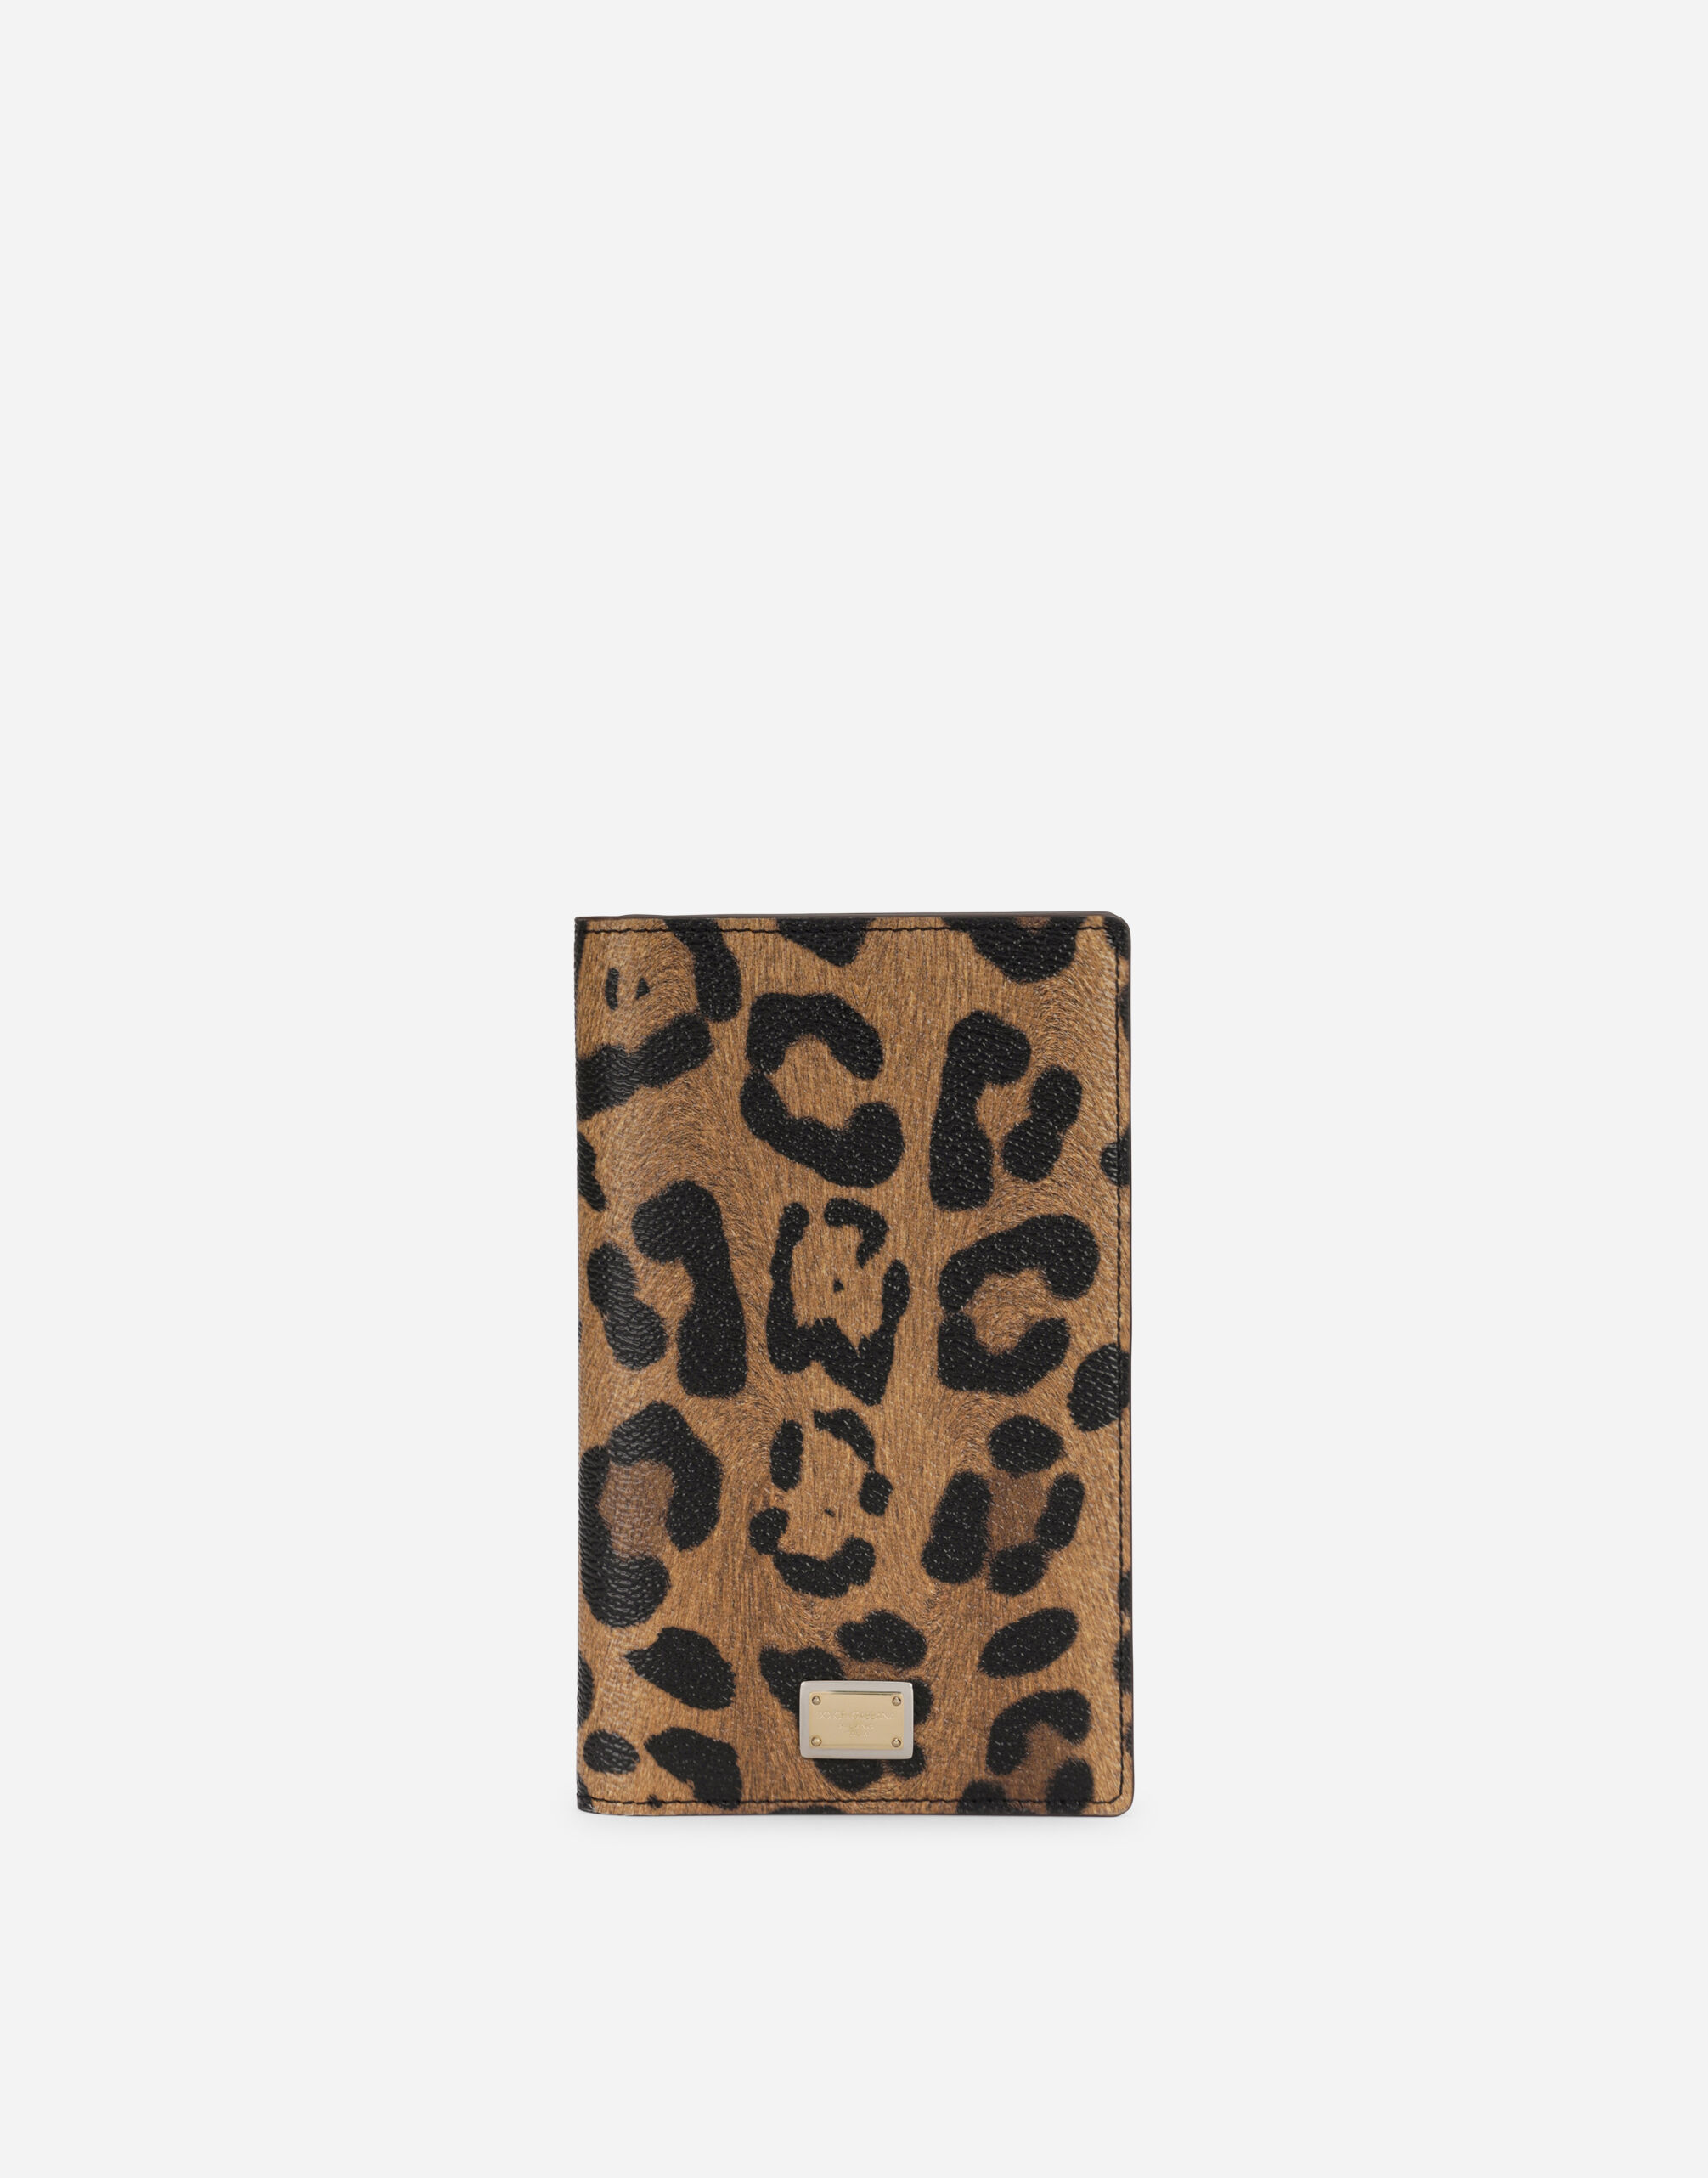 Dolce & Gabbana Leopard-print Crespo passport holder with branded plate Multicolor BB6933AW384